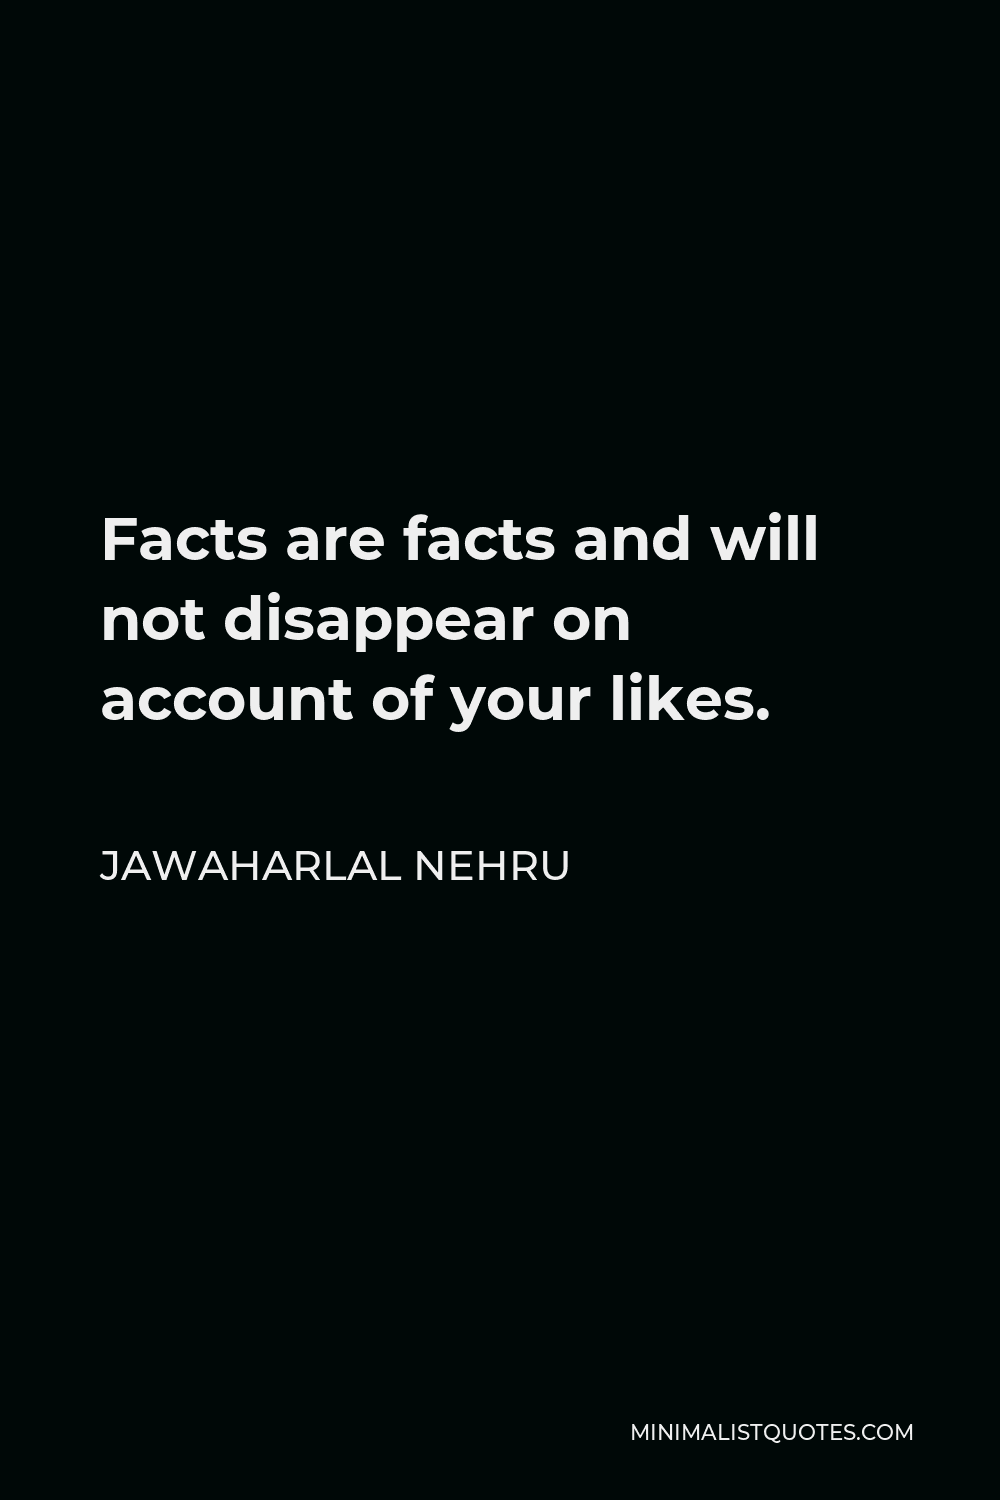 Jawaharlal Nehru Quote - Facts are facts and will not disappear on account of your likes.